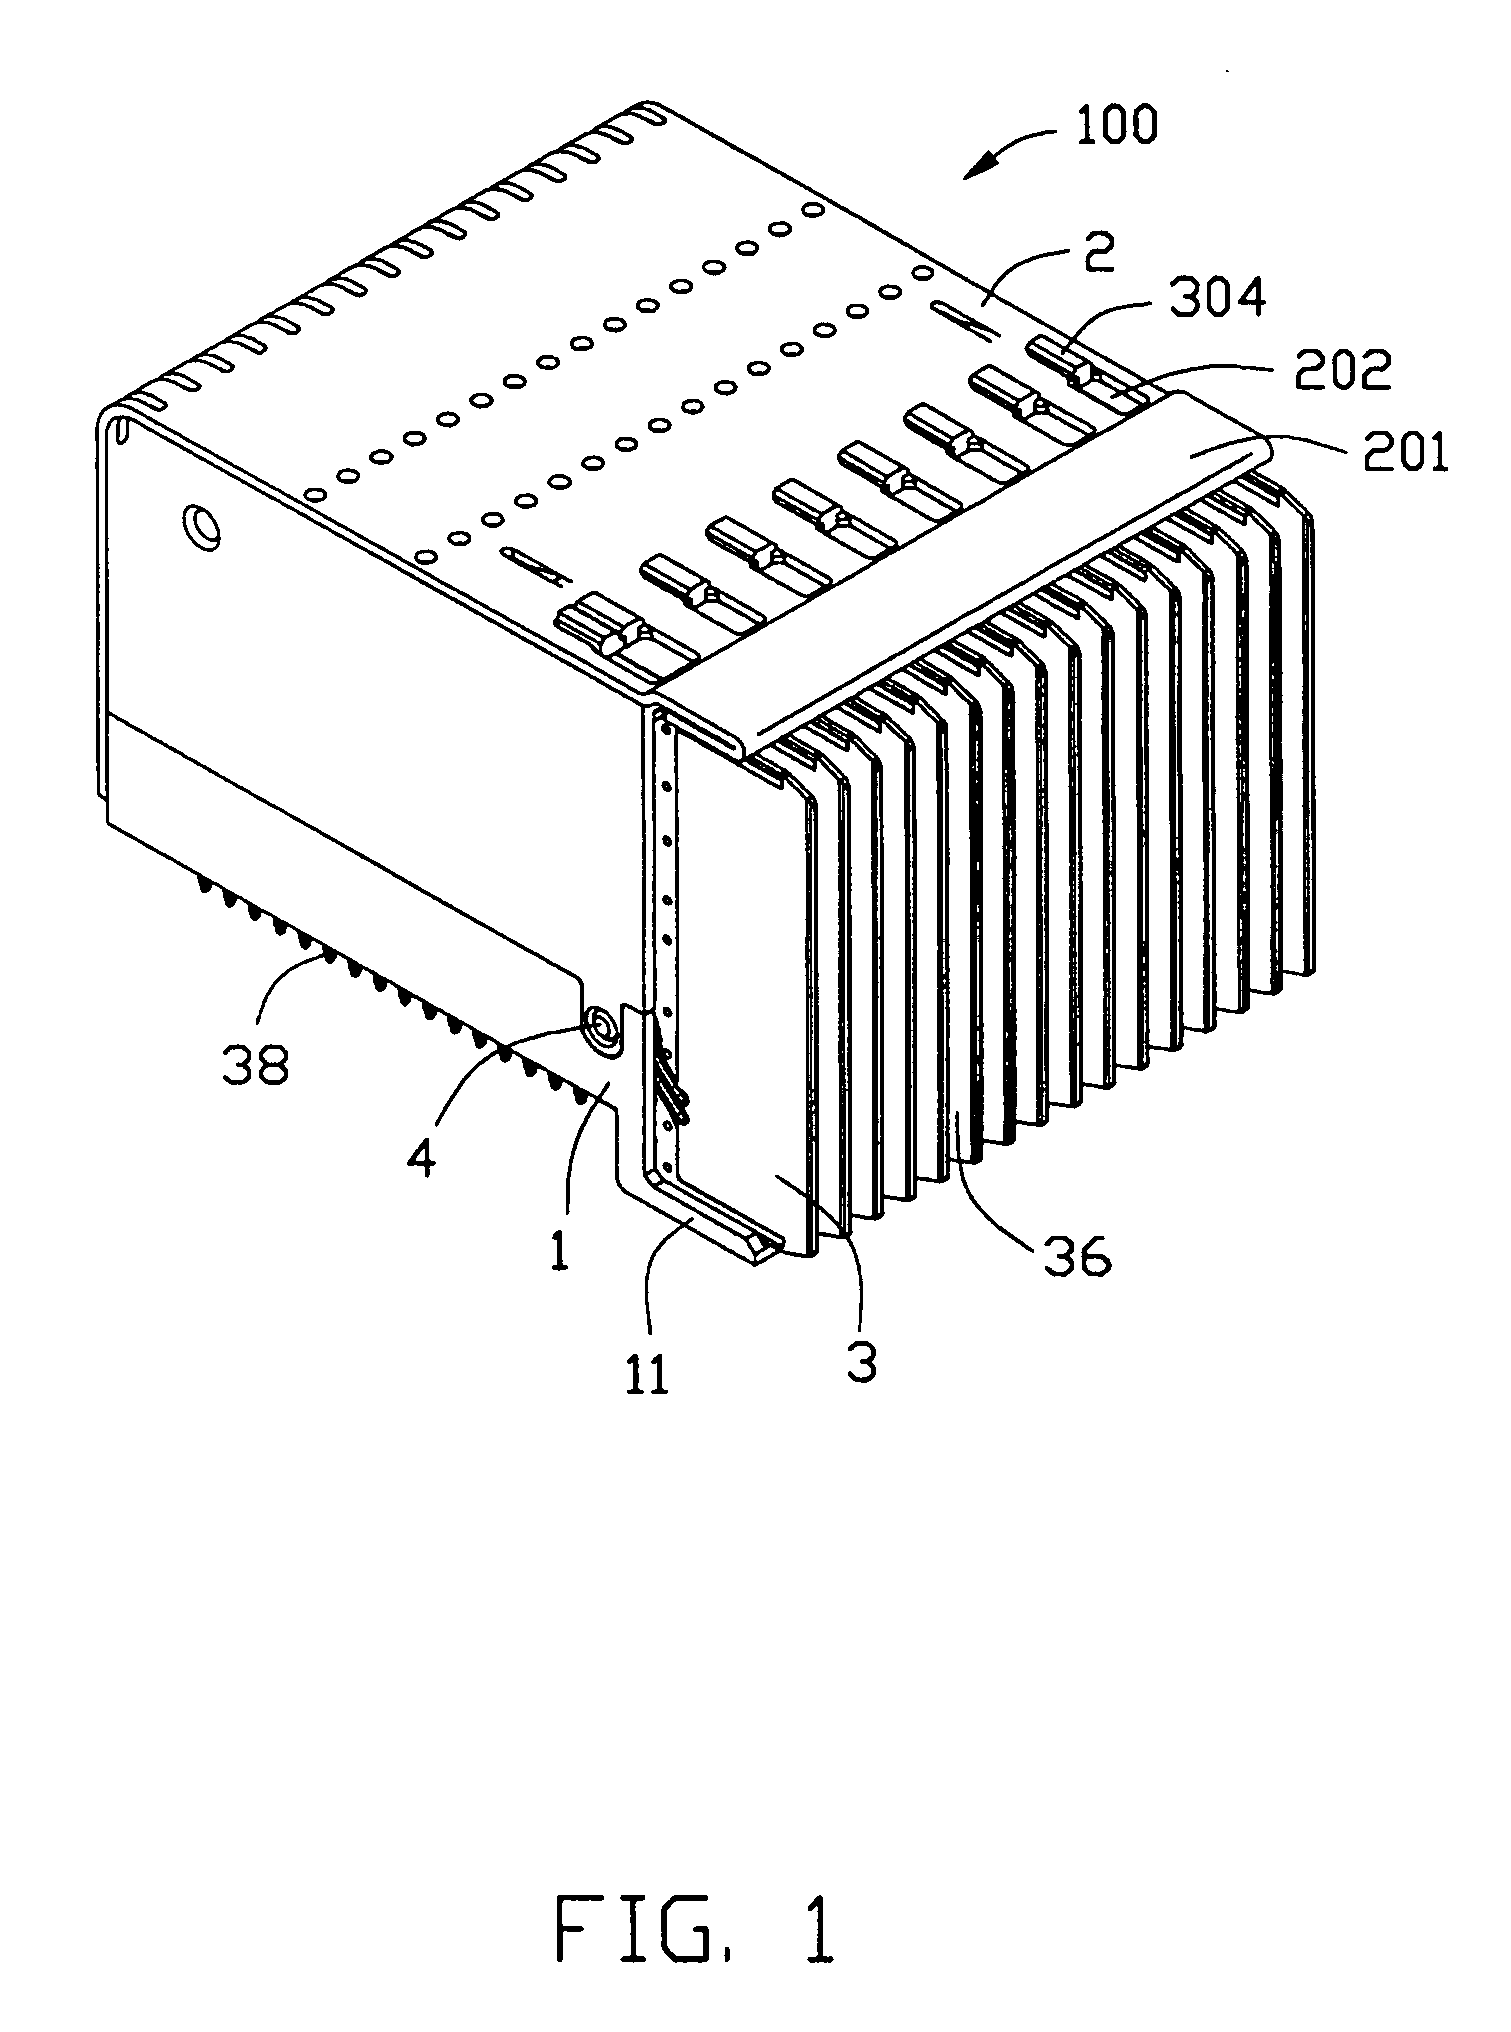 Electrical connector having circuit board modules positioned between metal stiffener and a housing